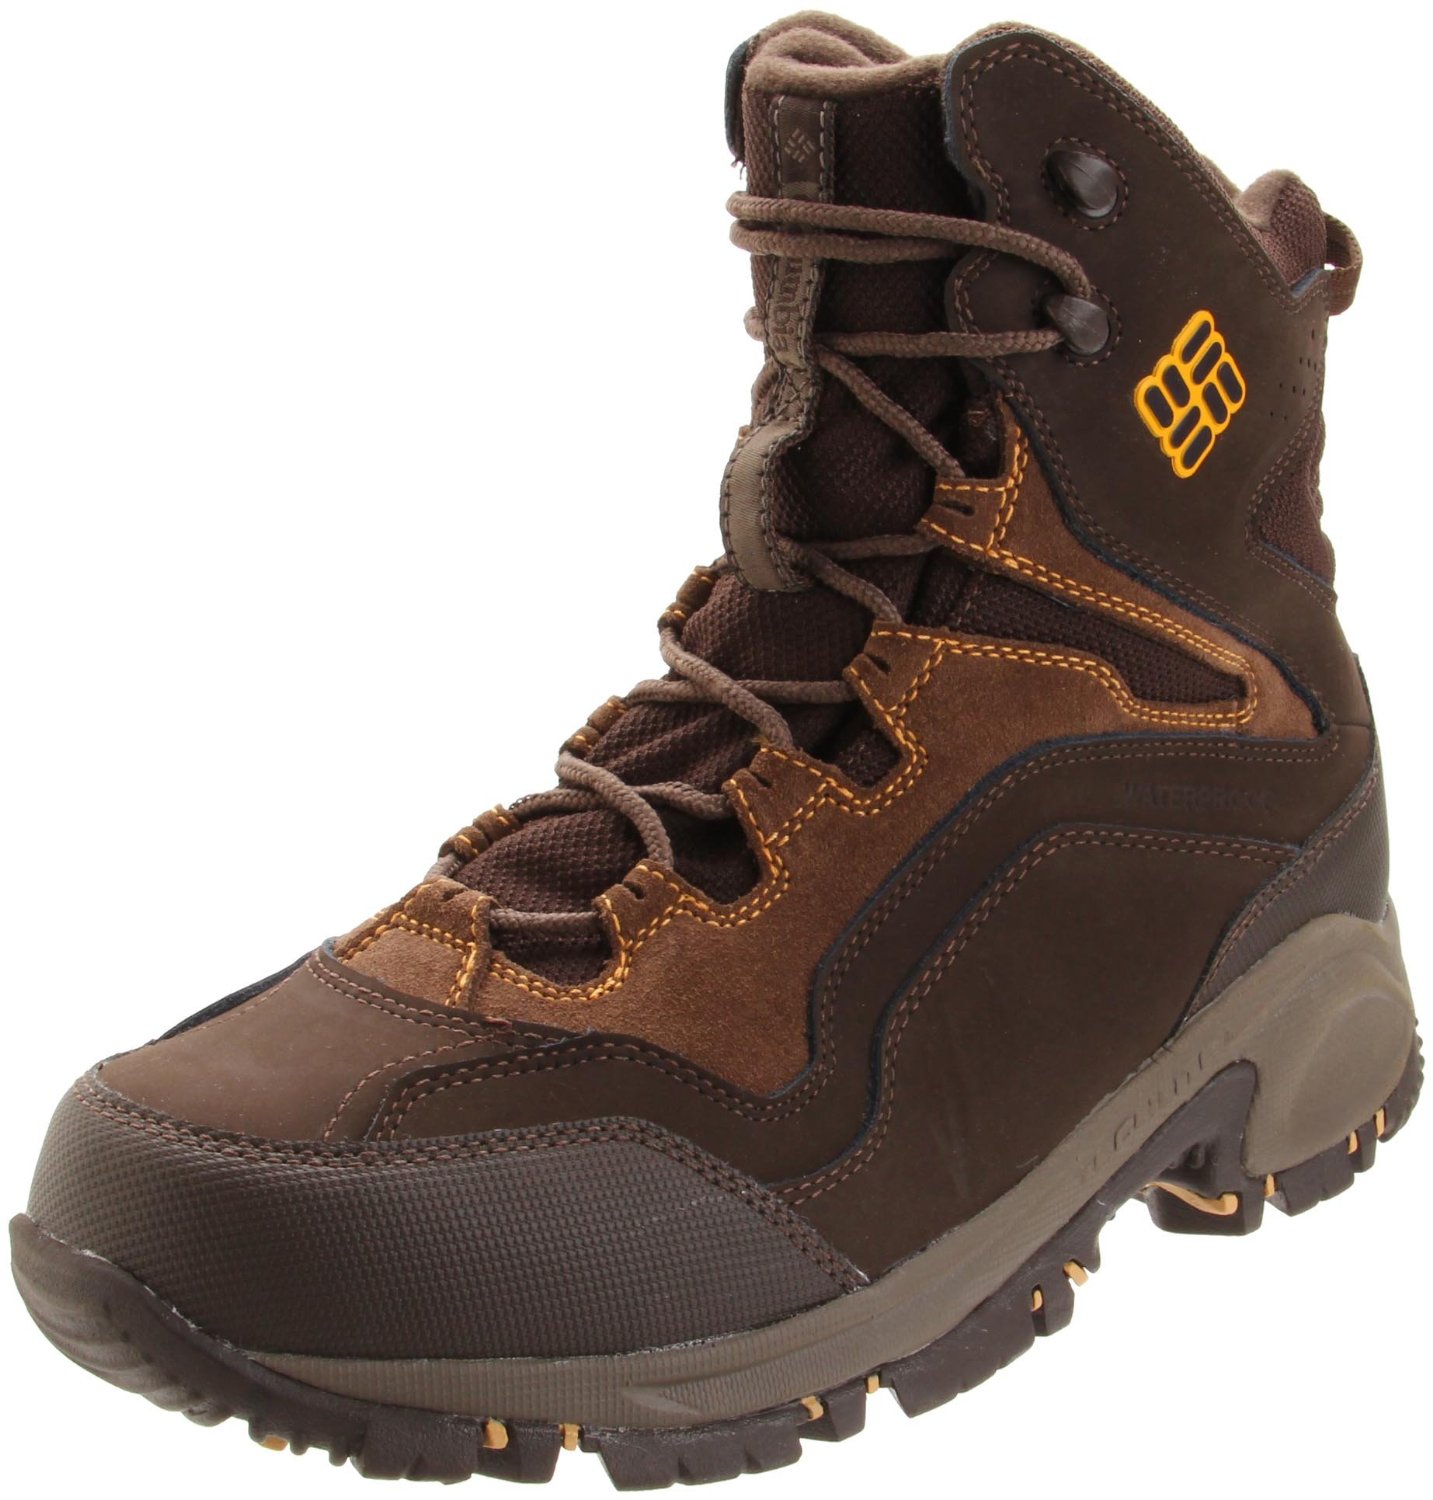 Columbia Sportswear Men's Liftop Cold Weather Boot  $52.23